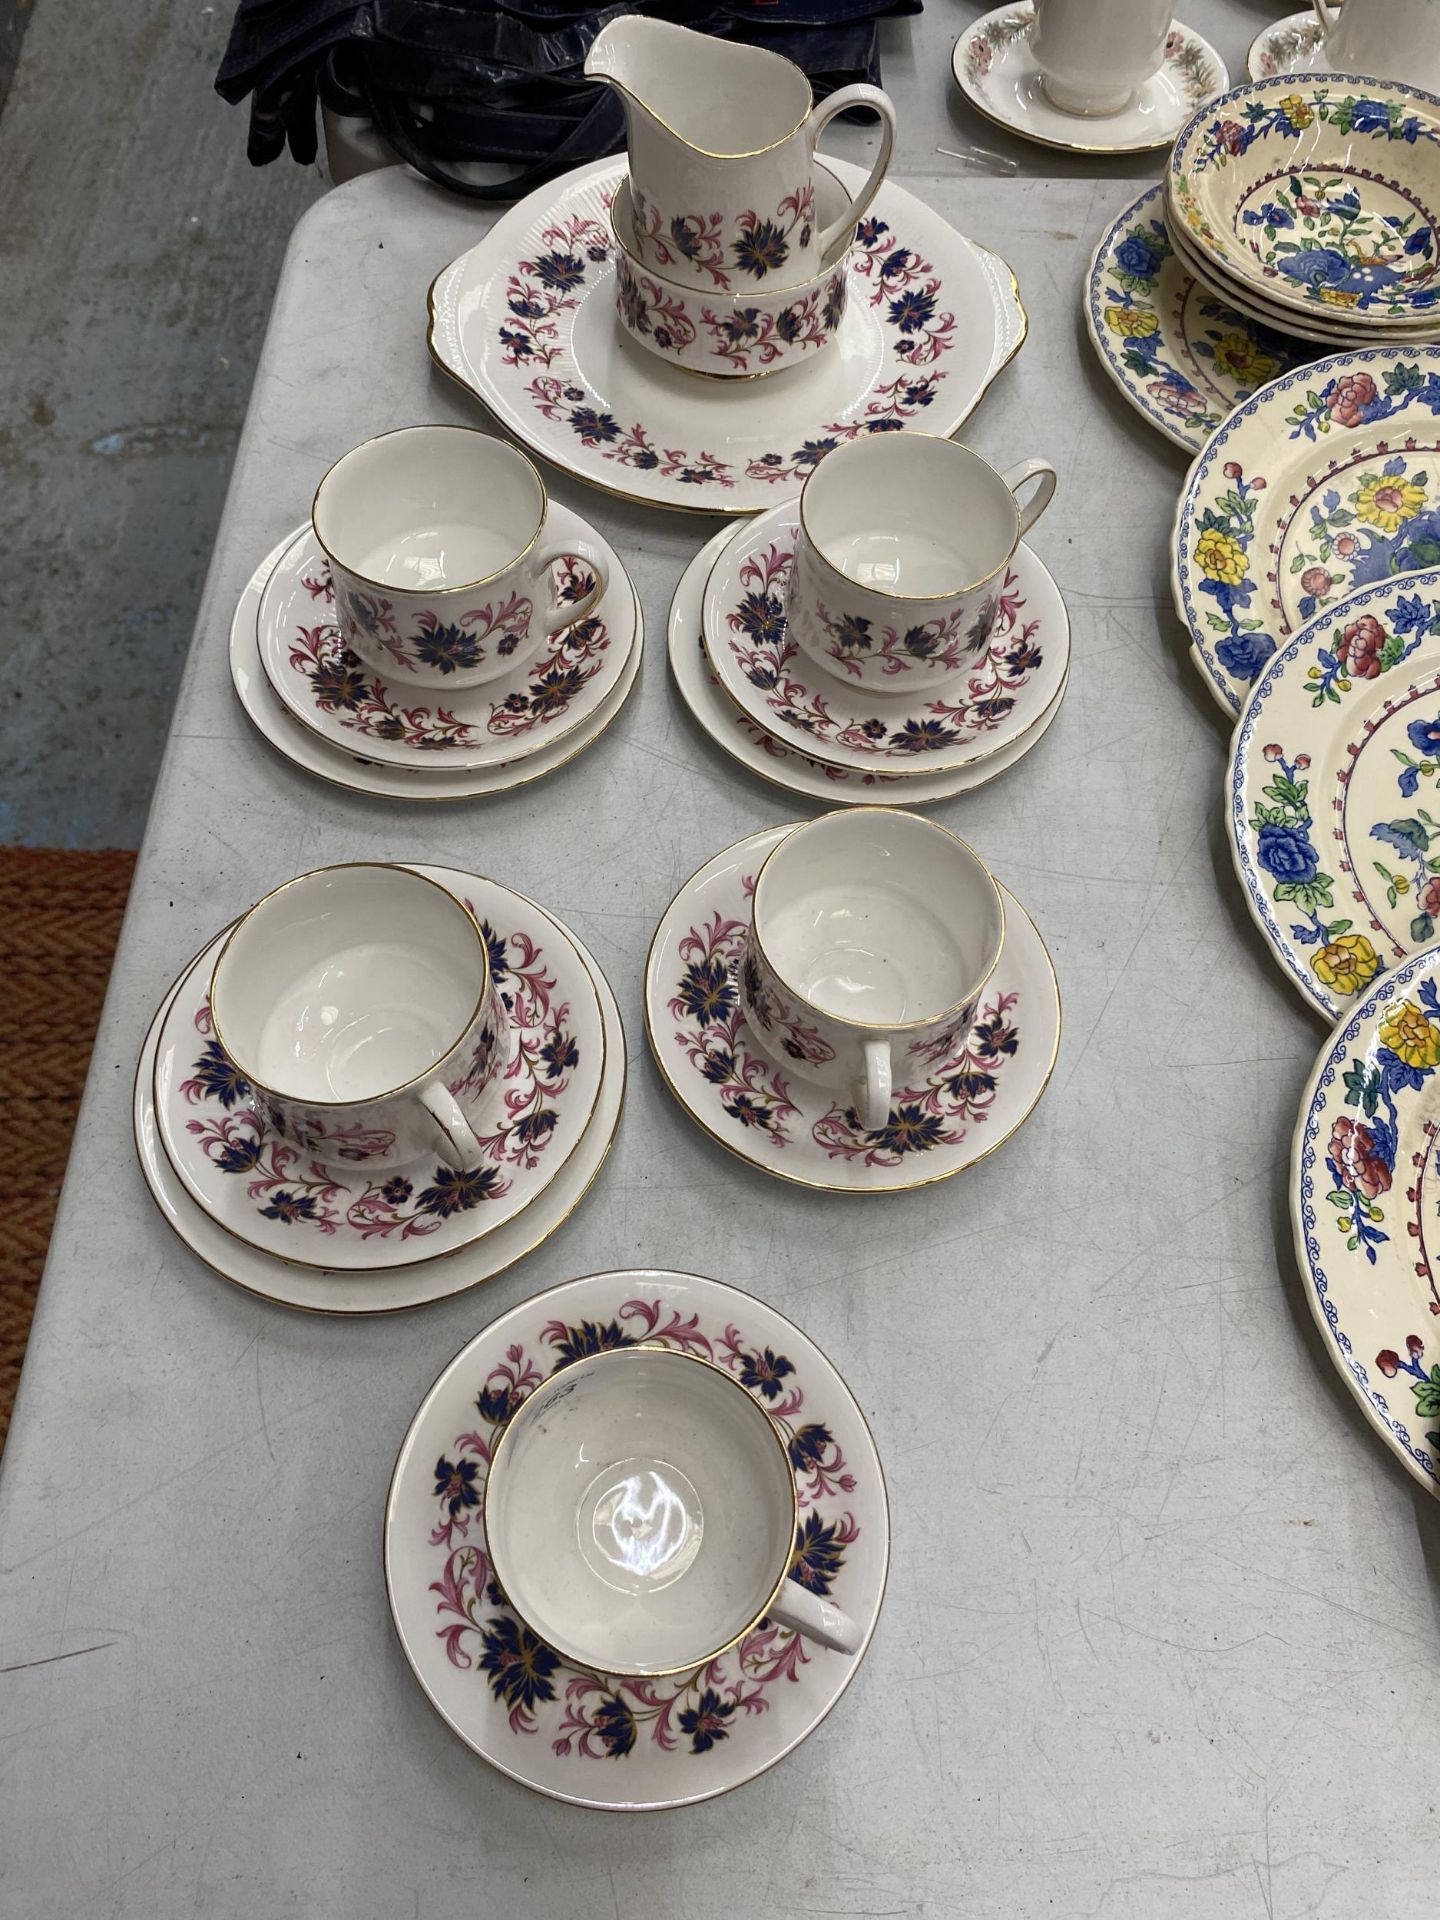 A PARAGON 'MICHELLE' CHINA TEASET TO INCLUDE A CAKE PLATE, SUGAR BOWL, CREAM JUG, CUPS, SAUCERS